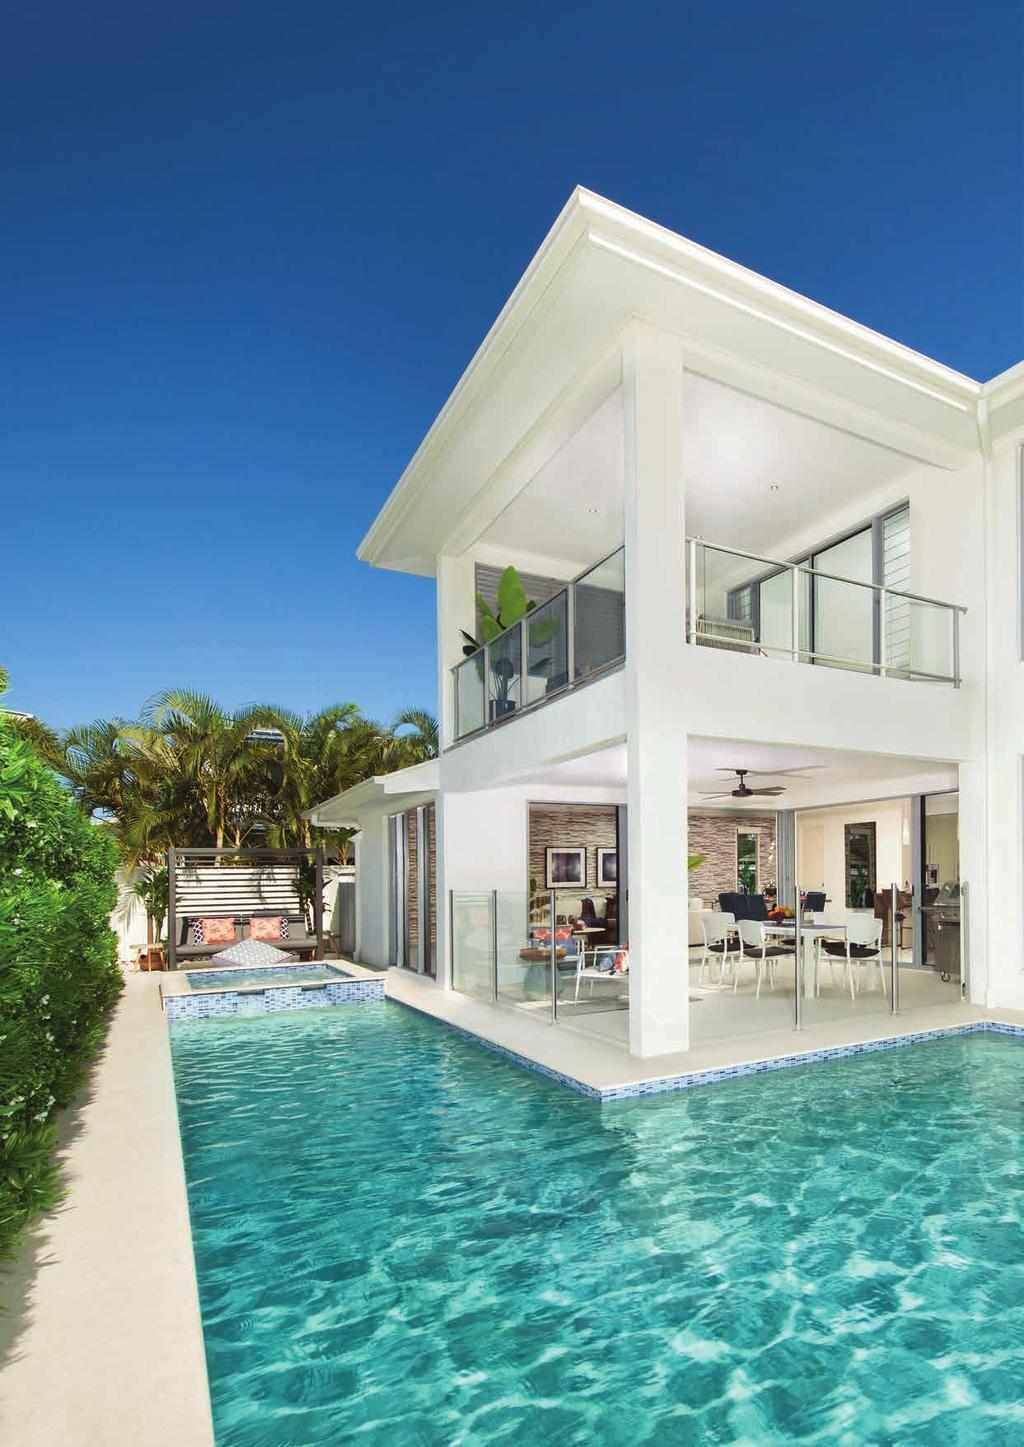 a $1.2M home WIN full of family h LOTTERY #409 Close: 7PM AEST WED 20